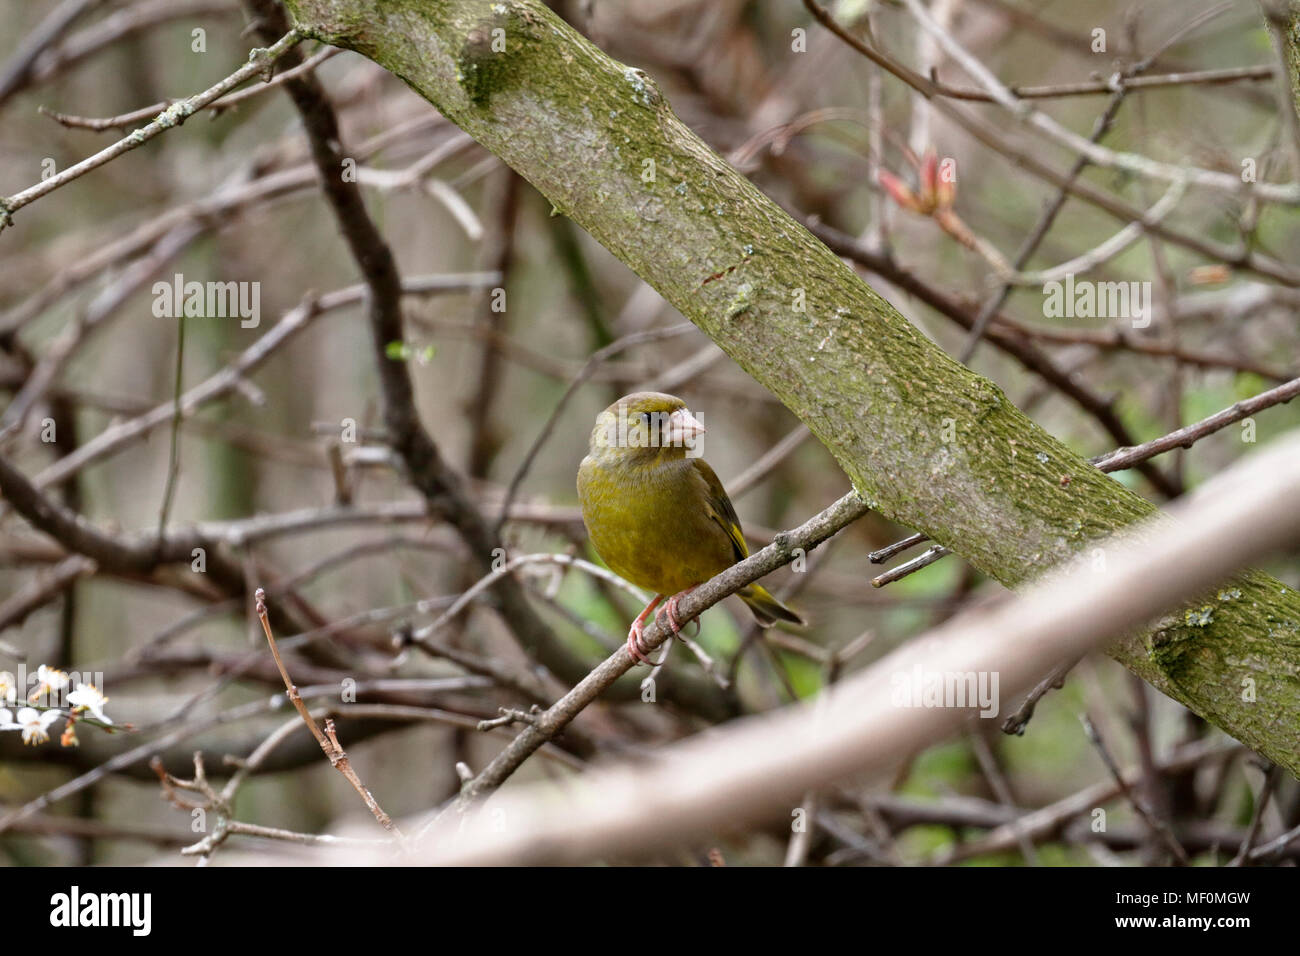 Greenfinch, Carduelis chloris in a hedgerow, England, UK. Stock Photo